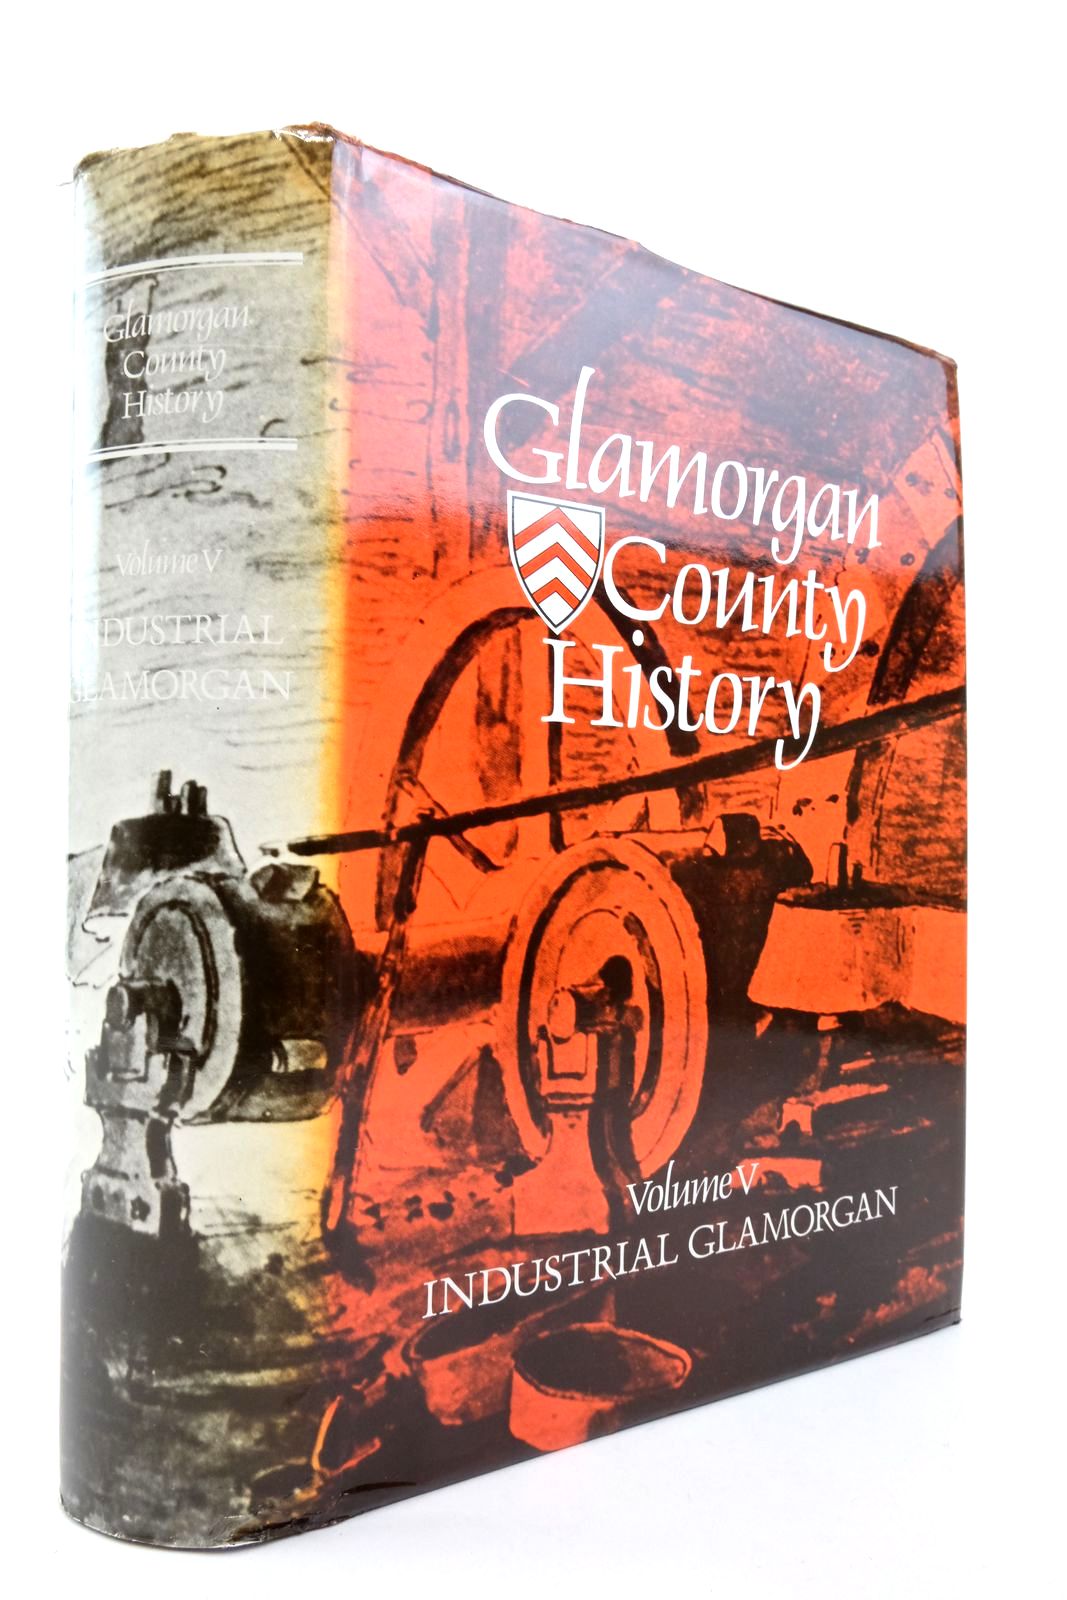 Photo of GLAMORGAN COUNTY HISTORY VOLUME V written by John, Arthur H. Williams, Glanmor published by Glamorgan County History Trust (STOCK CODE: 2137888)  for sale by Stella & Rose's Books